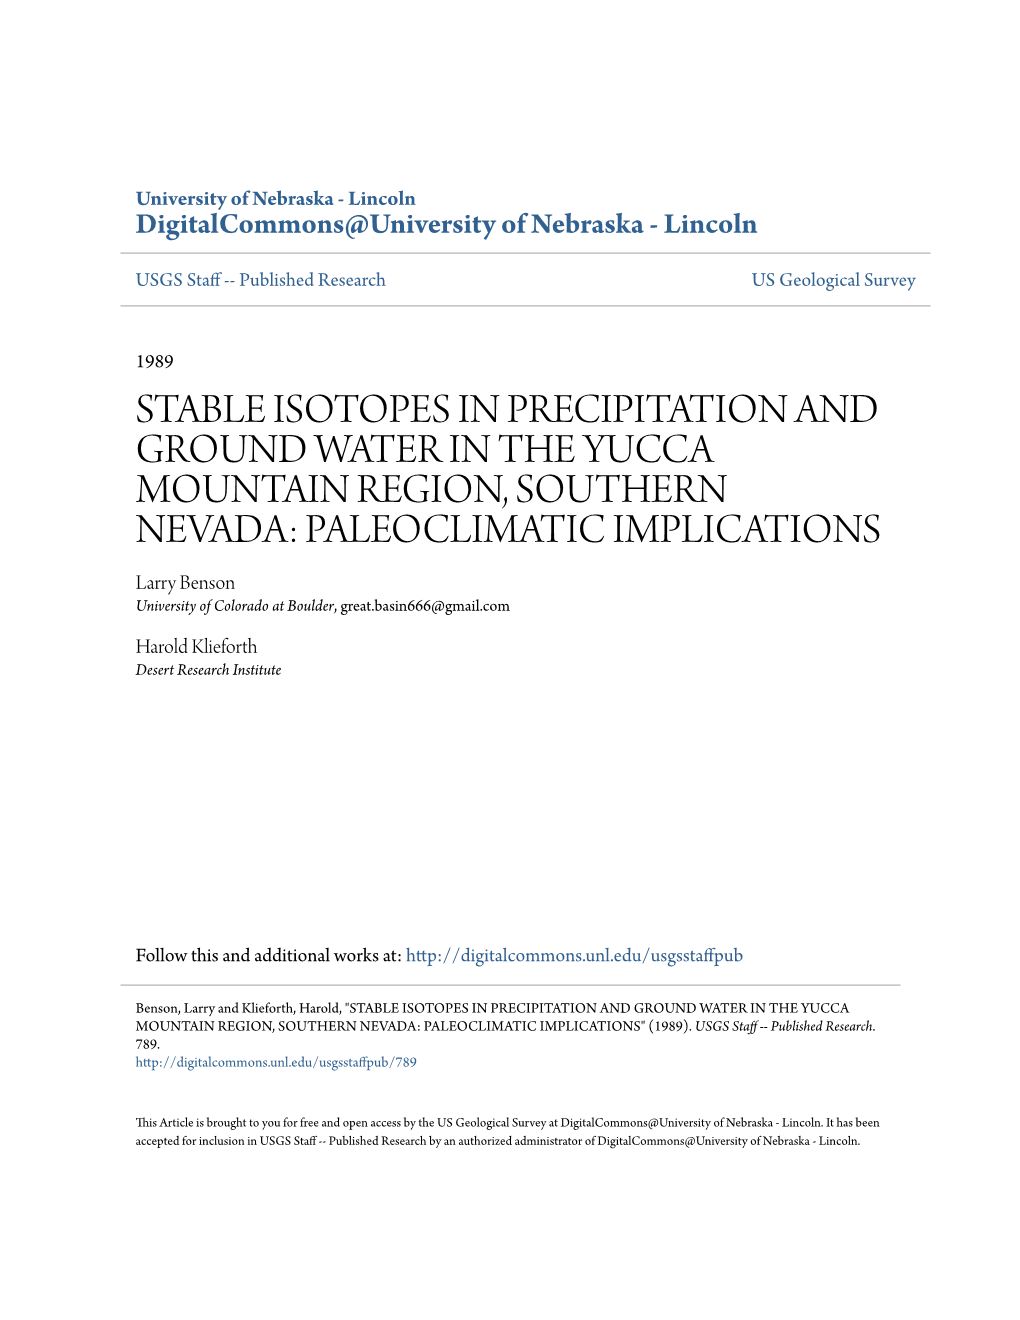 Stable Isotopes in Precipitation and Ground Water in the Yucca Mountain